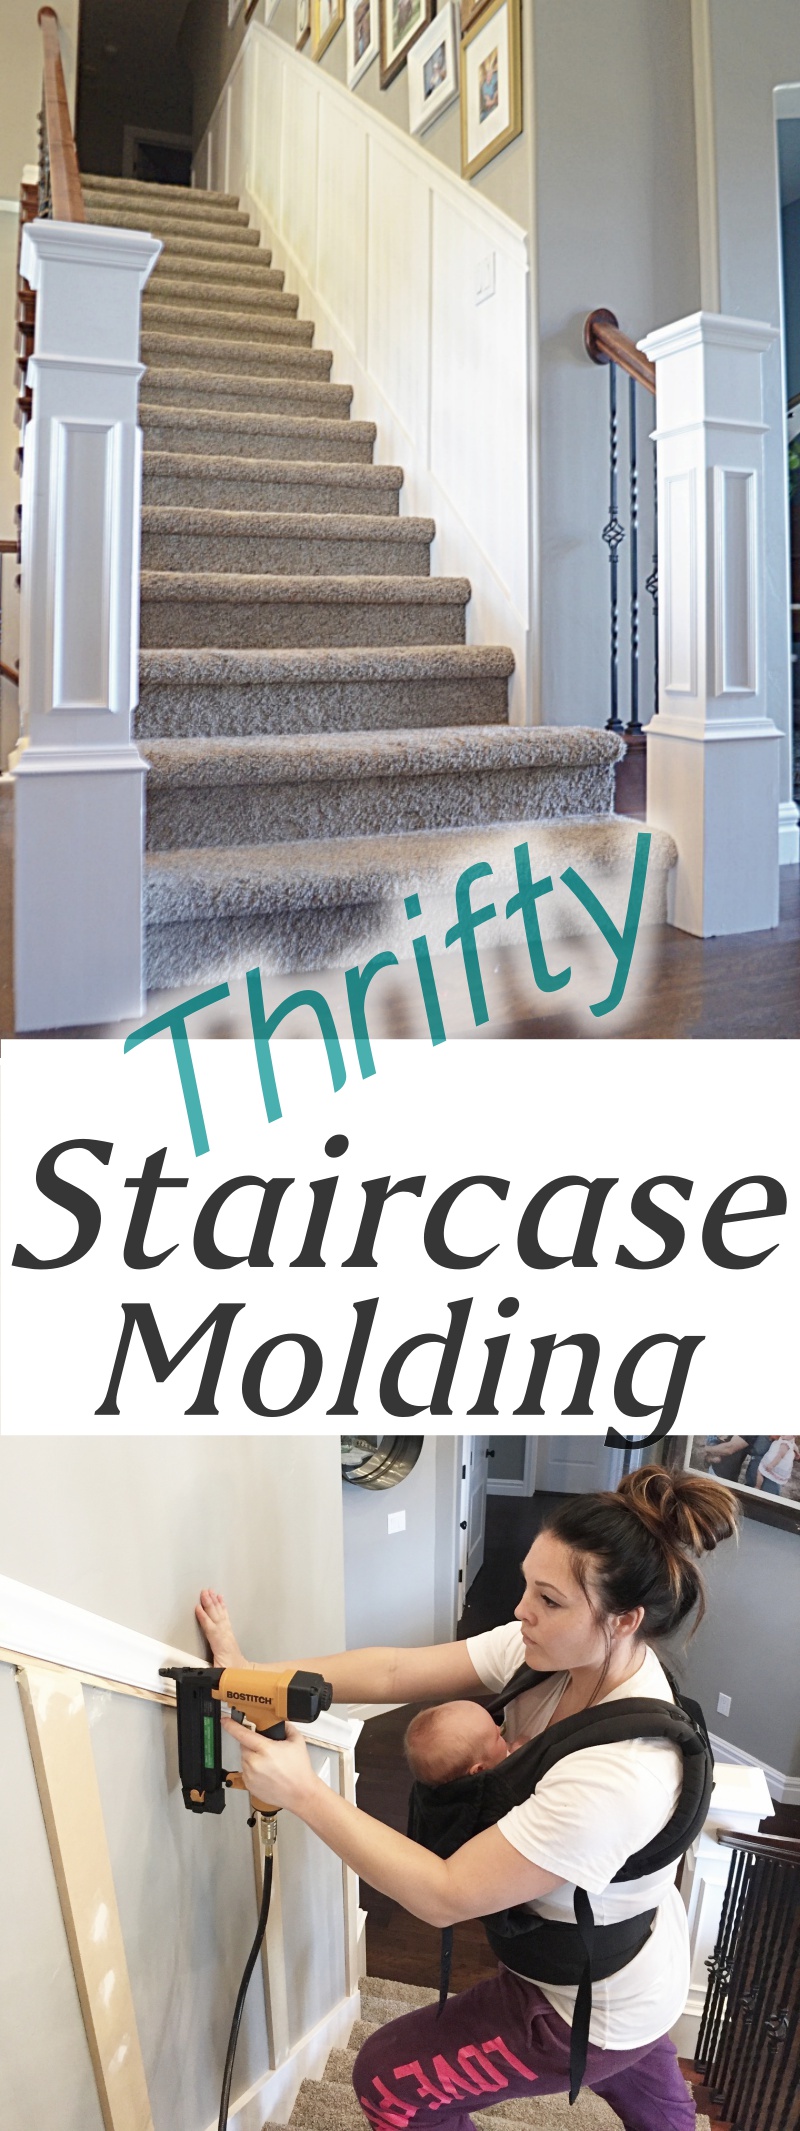 Thrifty staircase molding DIY